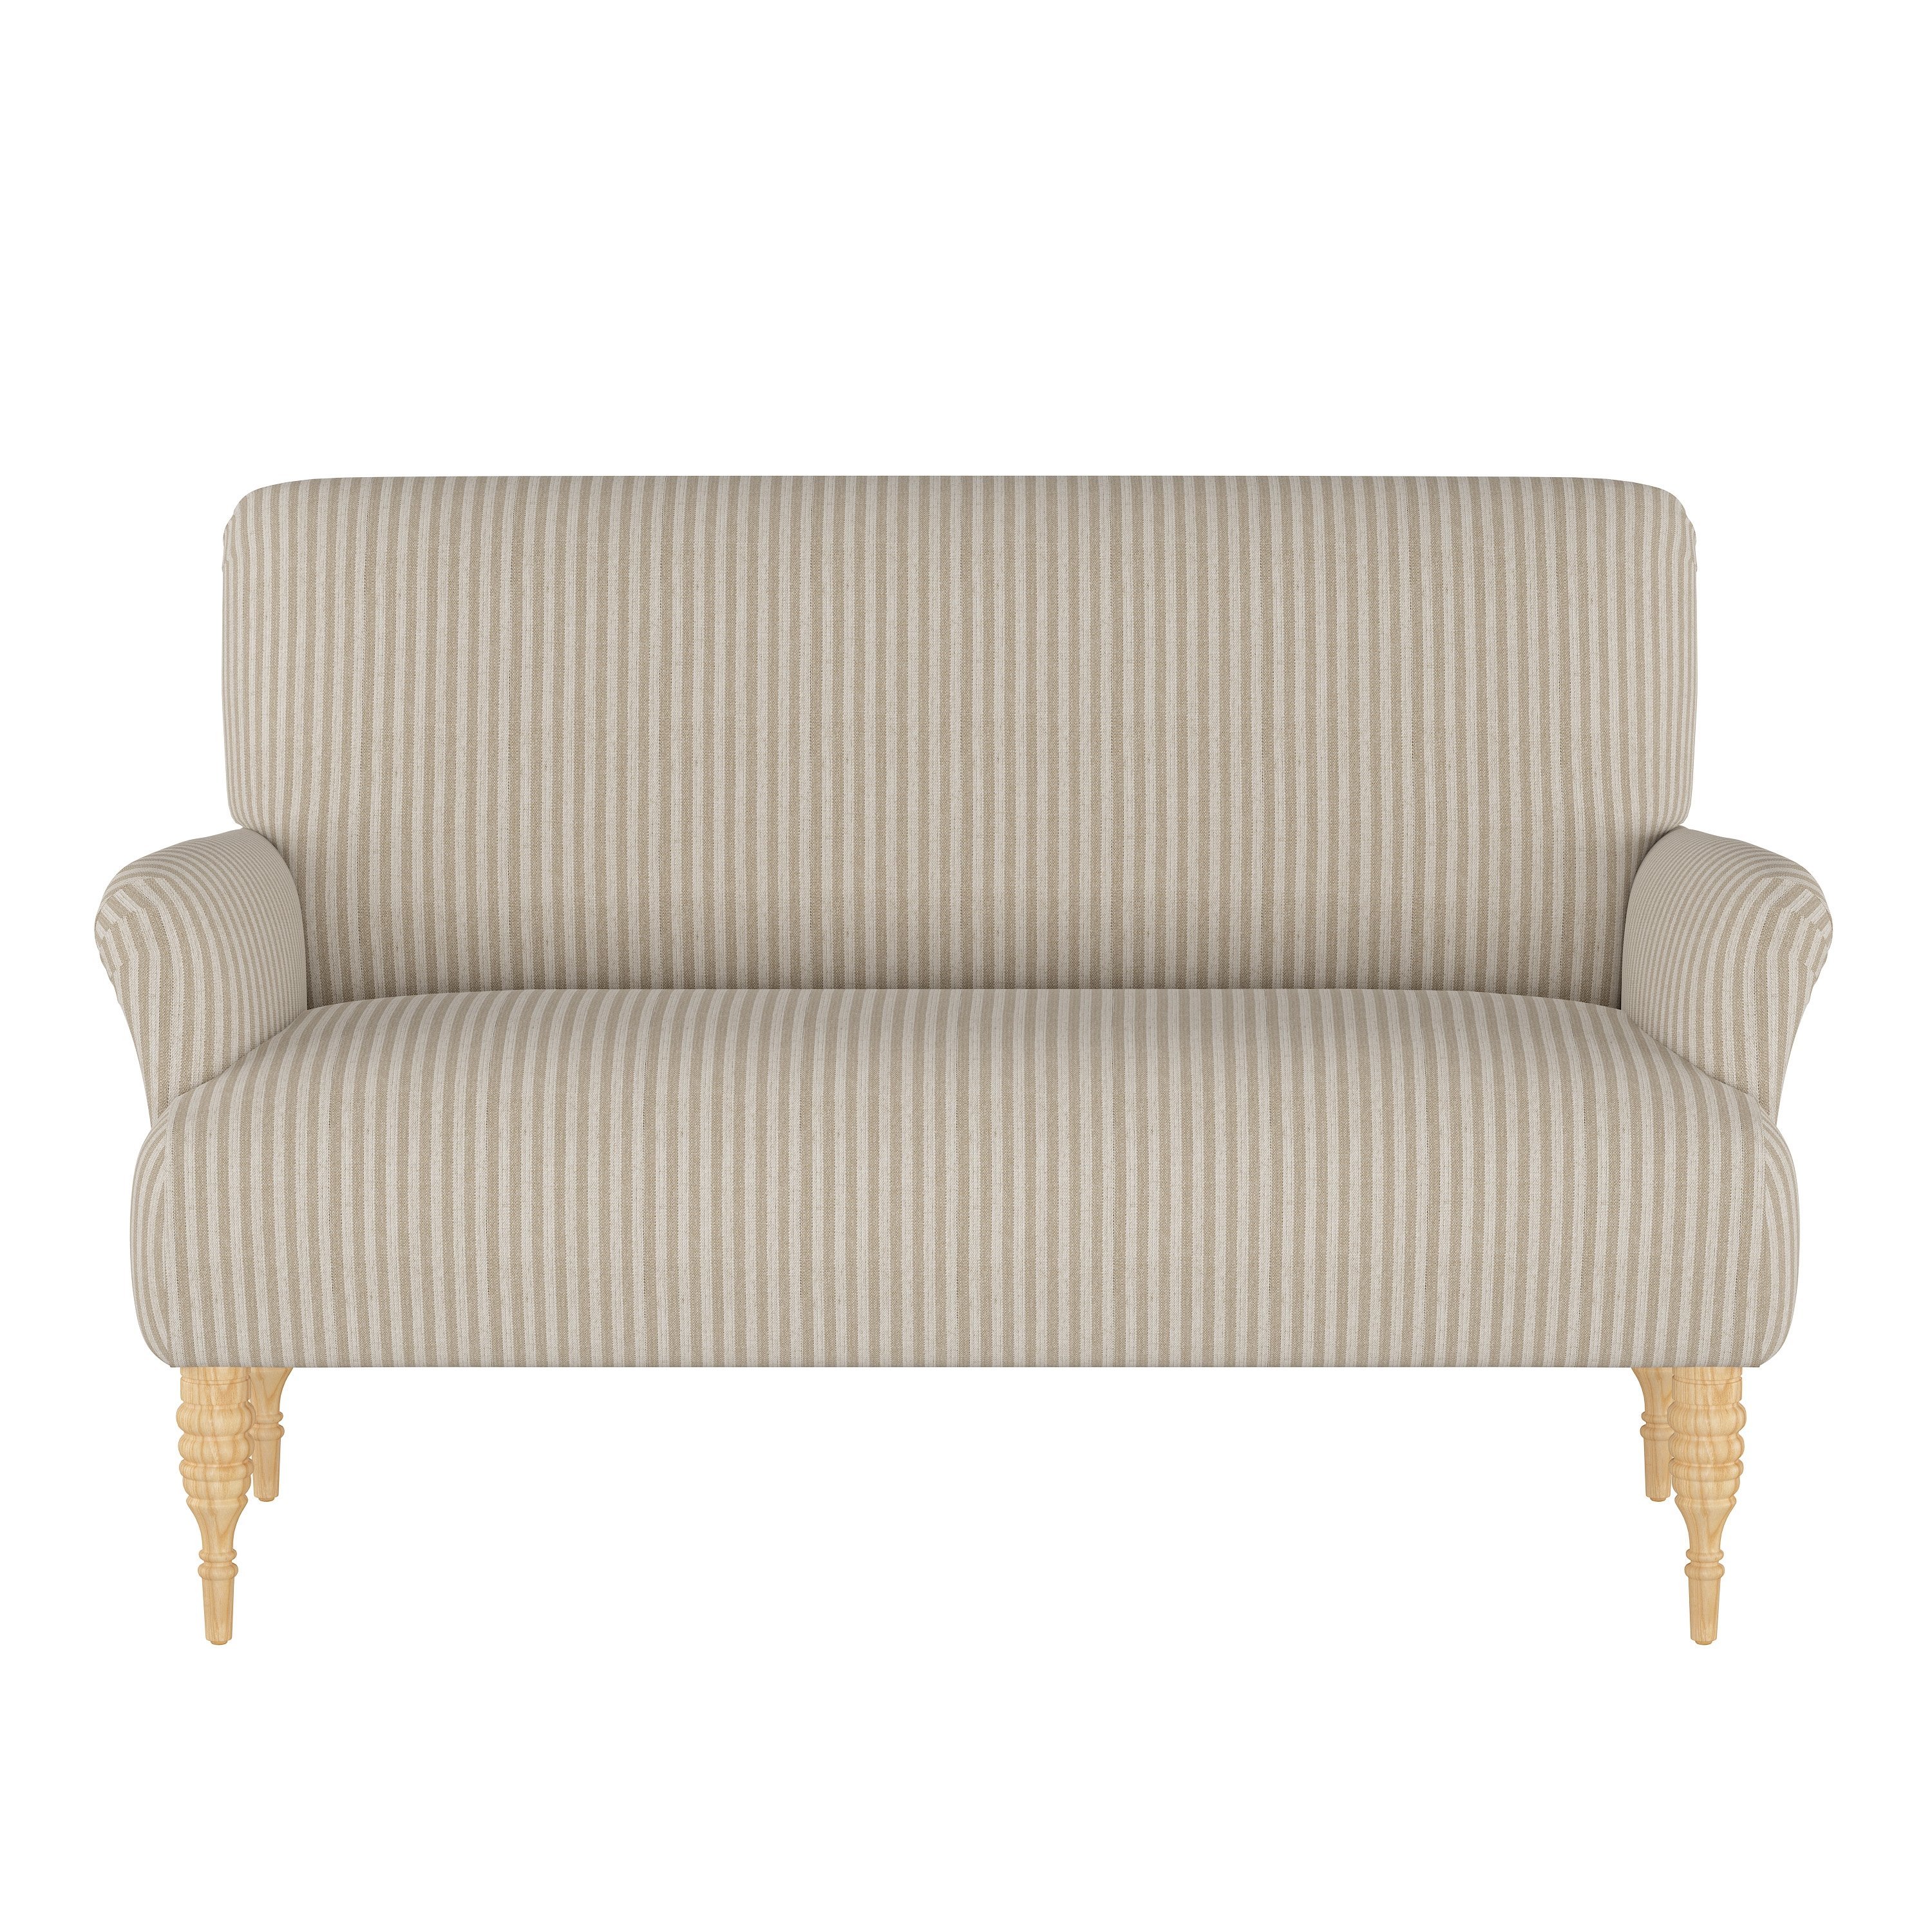 Nicola Settee in Scout Stripe Taupe - Image 1